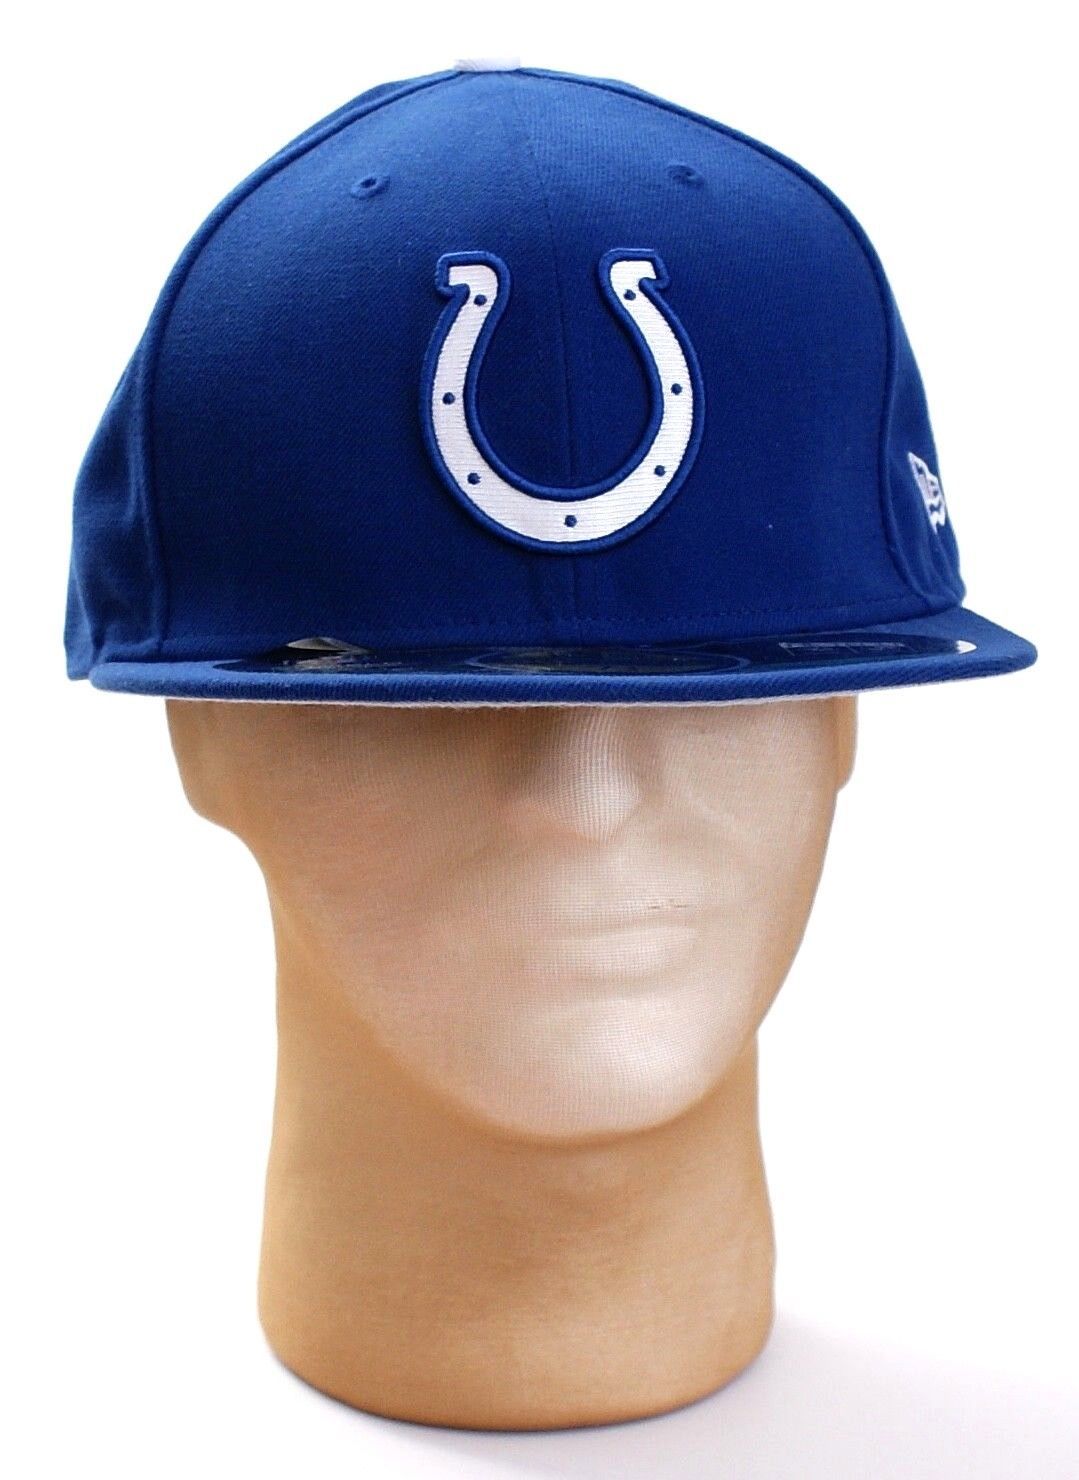 New Era 59Fifty NFL Indianapolis Colts Blue On Field Fitted Hat Cap Adult NWT - $26.24